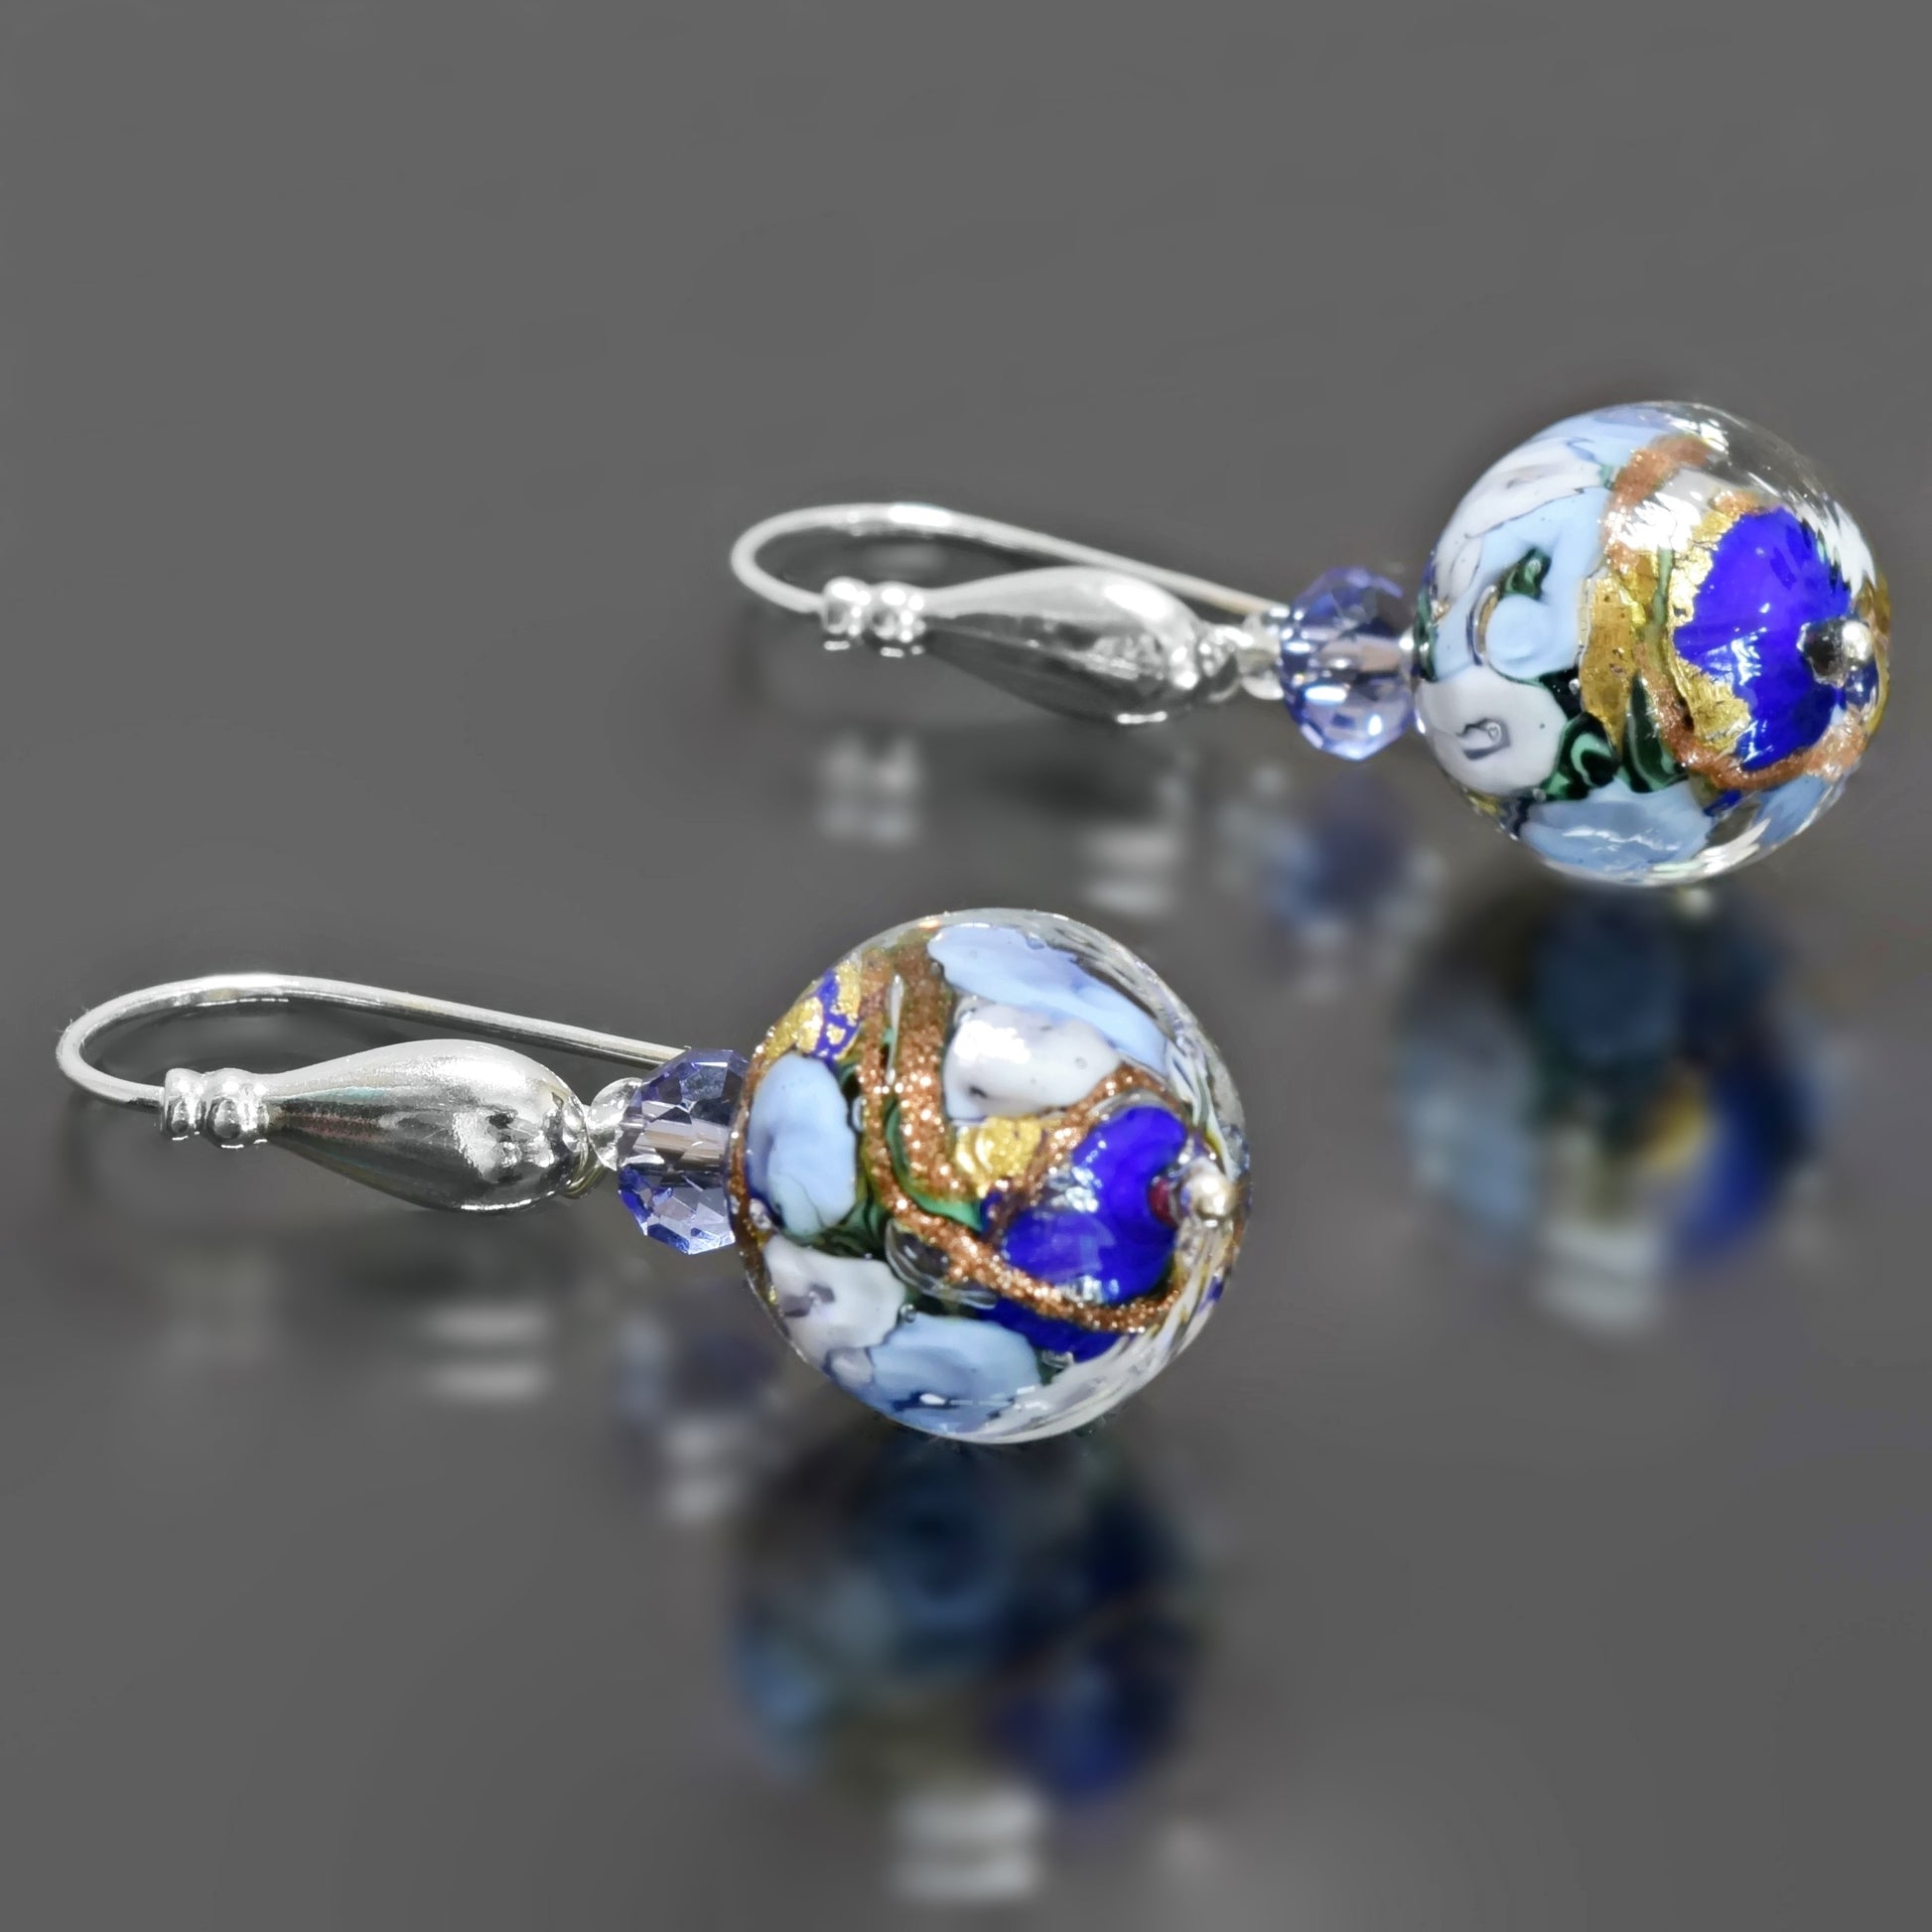 Blue and White Floral Bead Earrings with Swarovski Crystals  